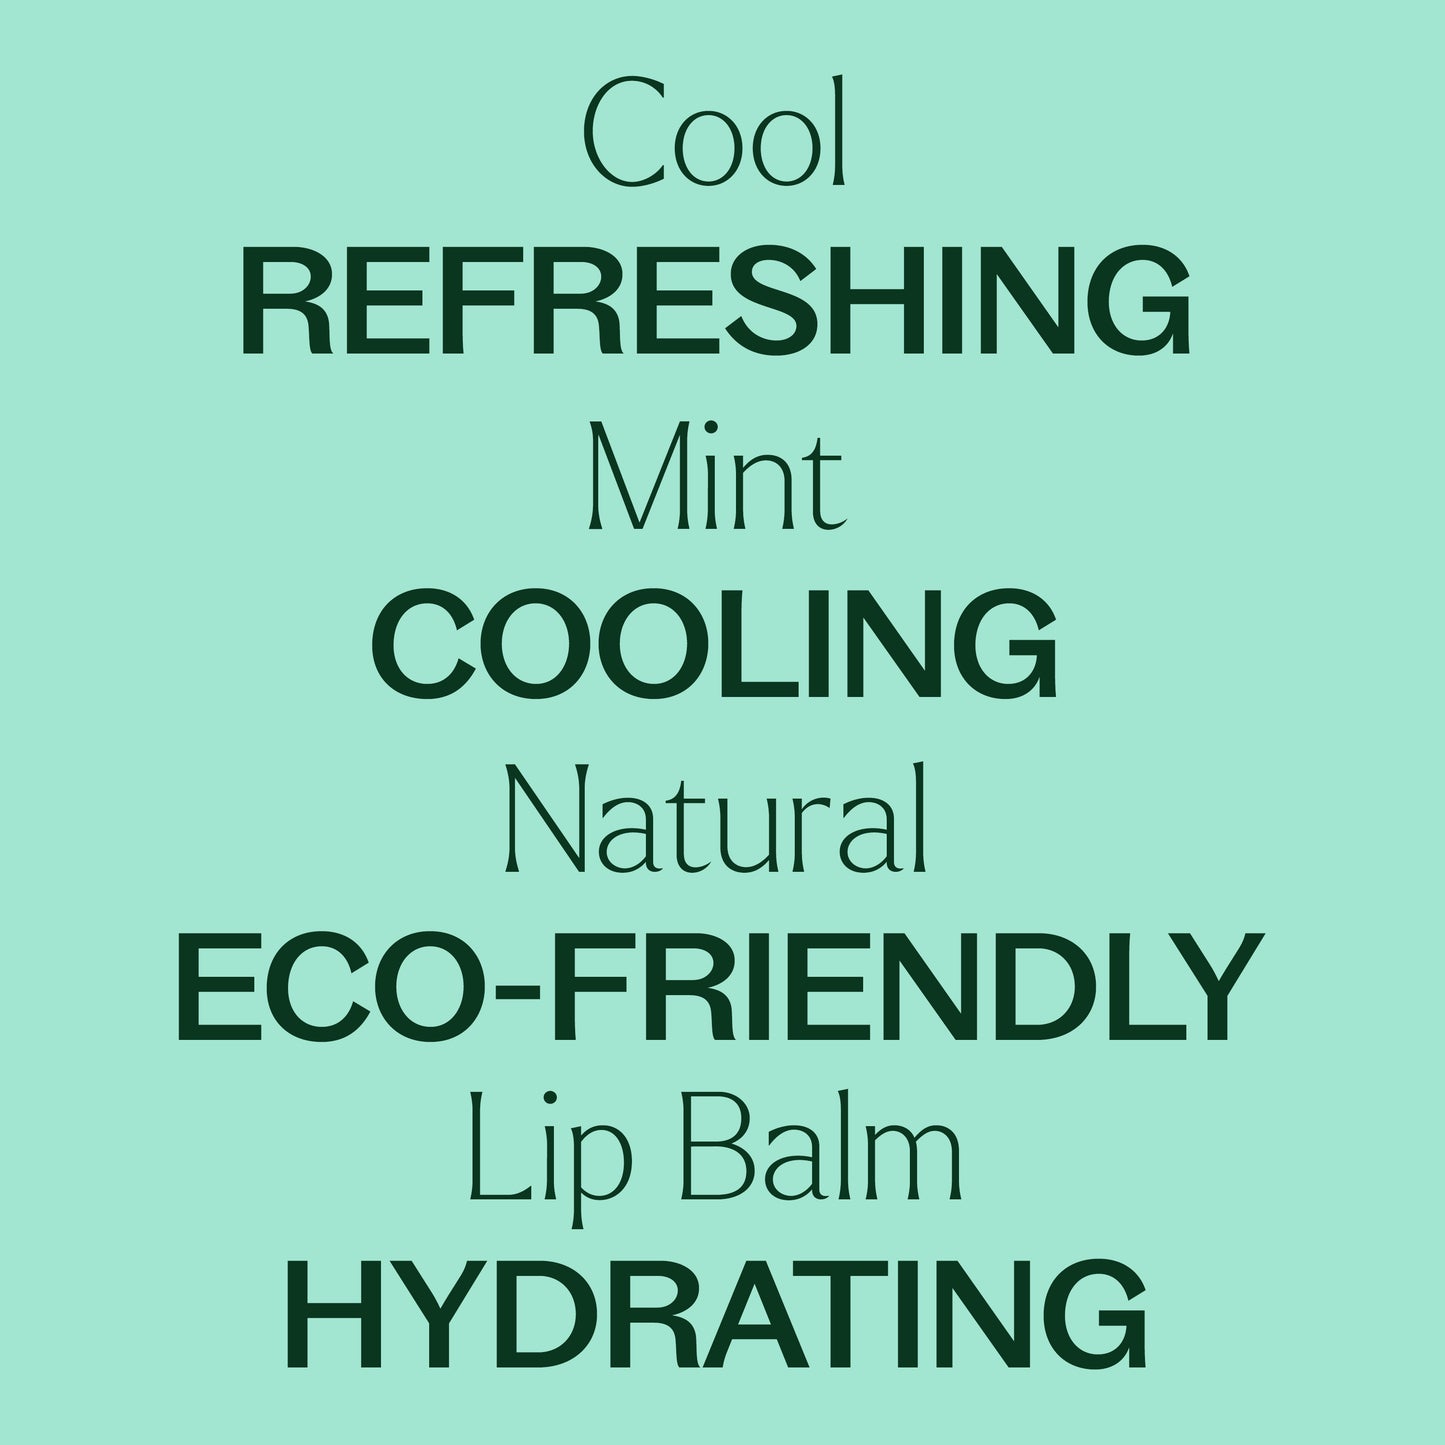 Cool Mint Natural Lip Balm is refreshing, cooling, eco-friendly, hydrating